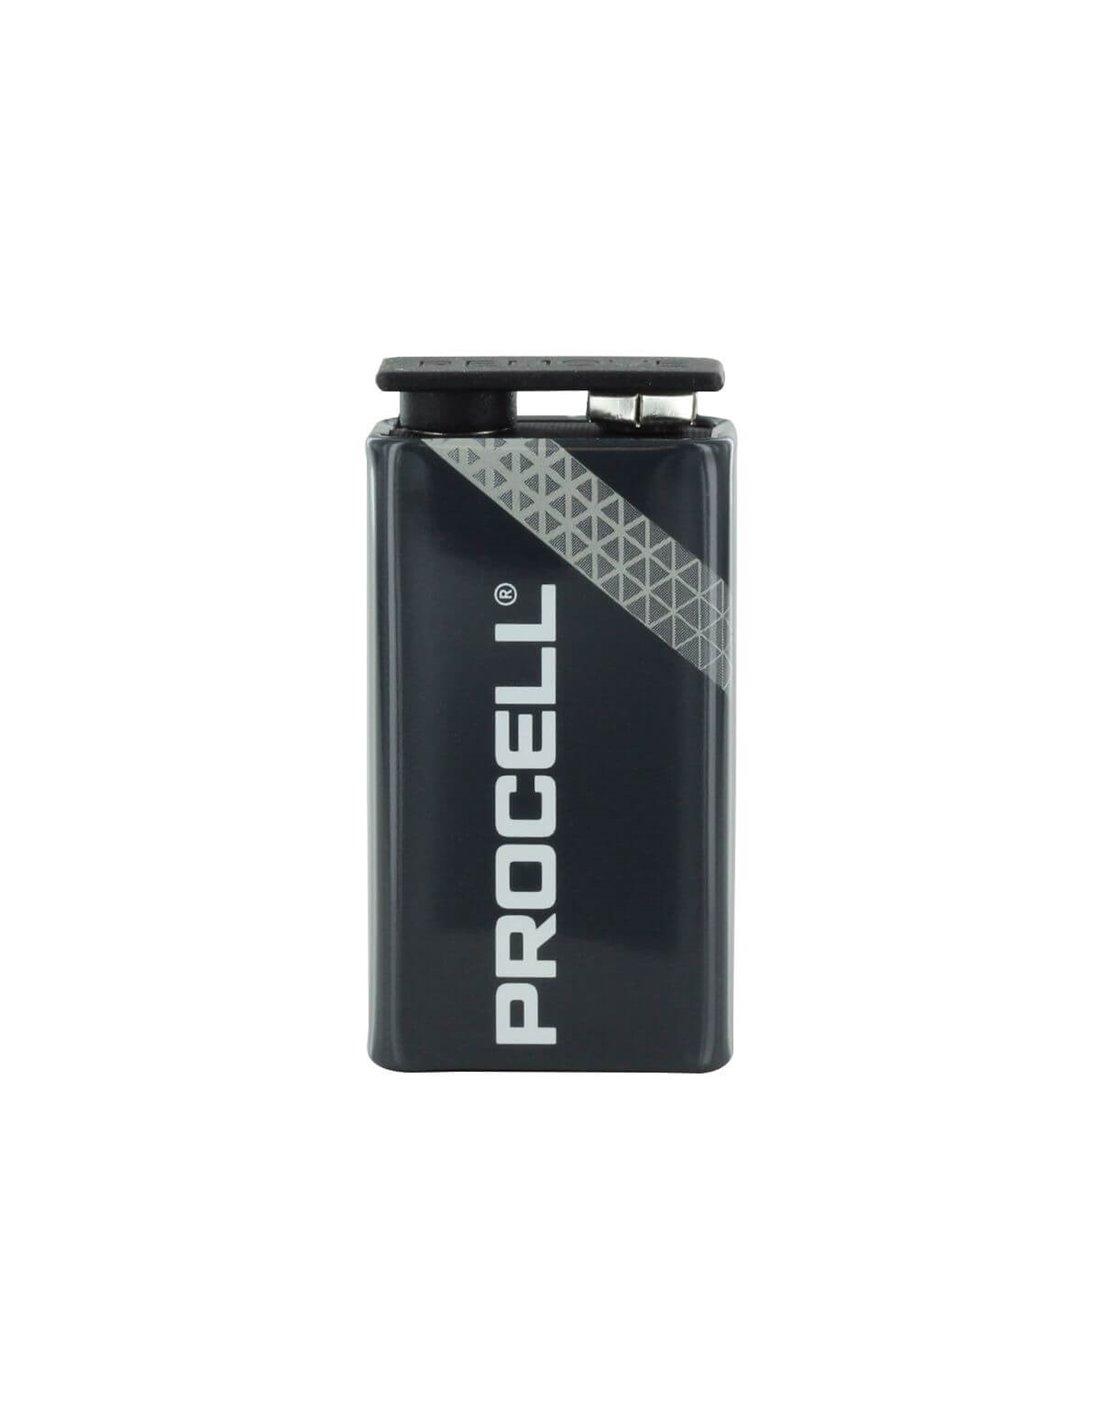 Duracell Procell 9 Volt Alkaline battery PC1604 - Non Rechargeable